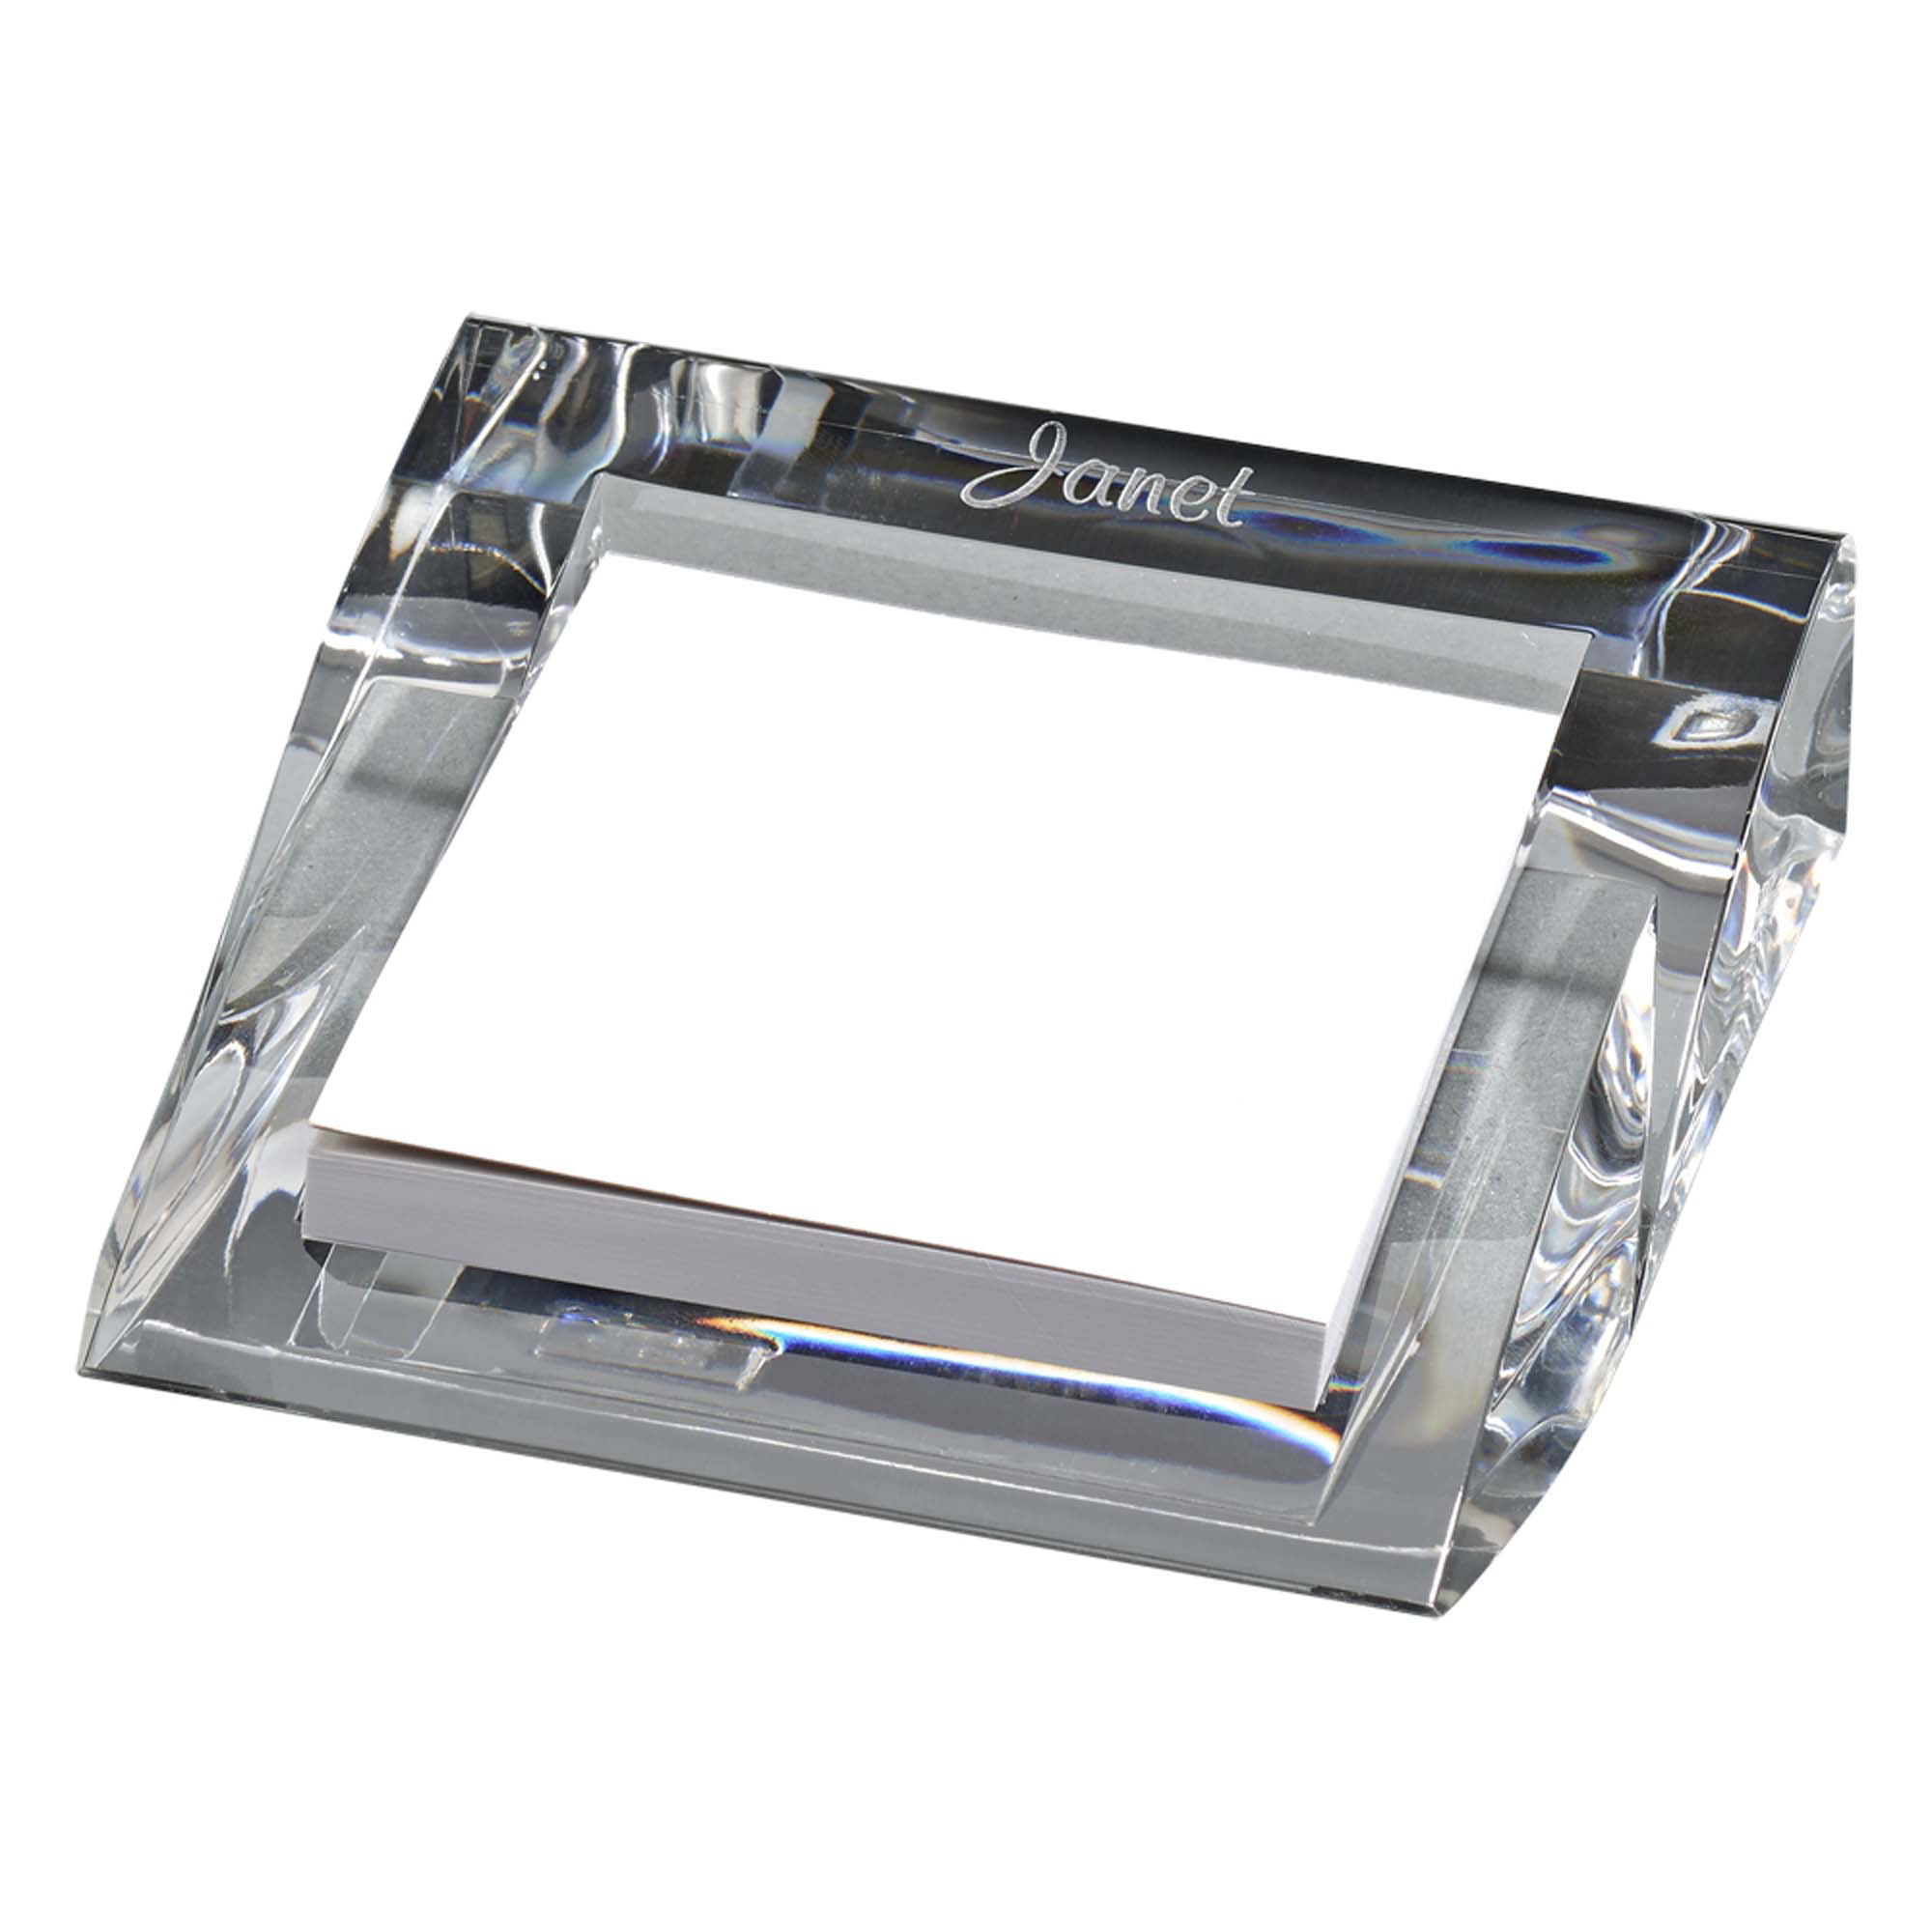 4.25 X 4.25 In. Clearylic Pad Or Paper Holder - Silver